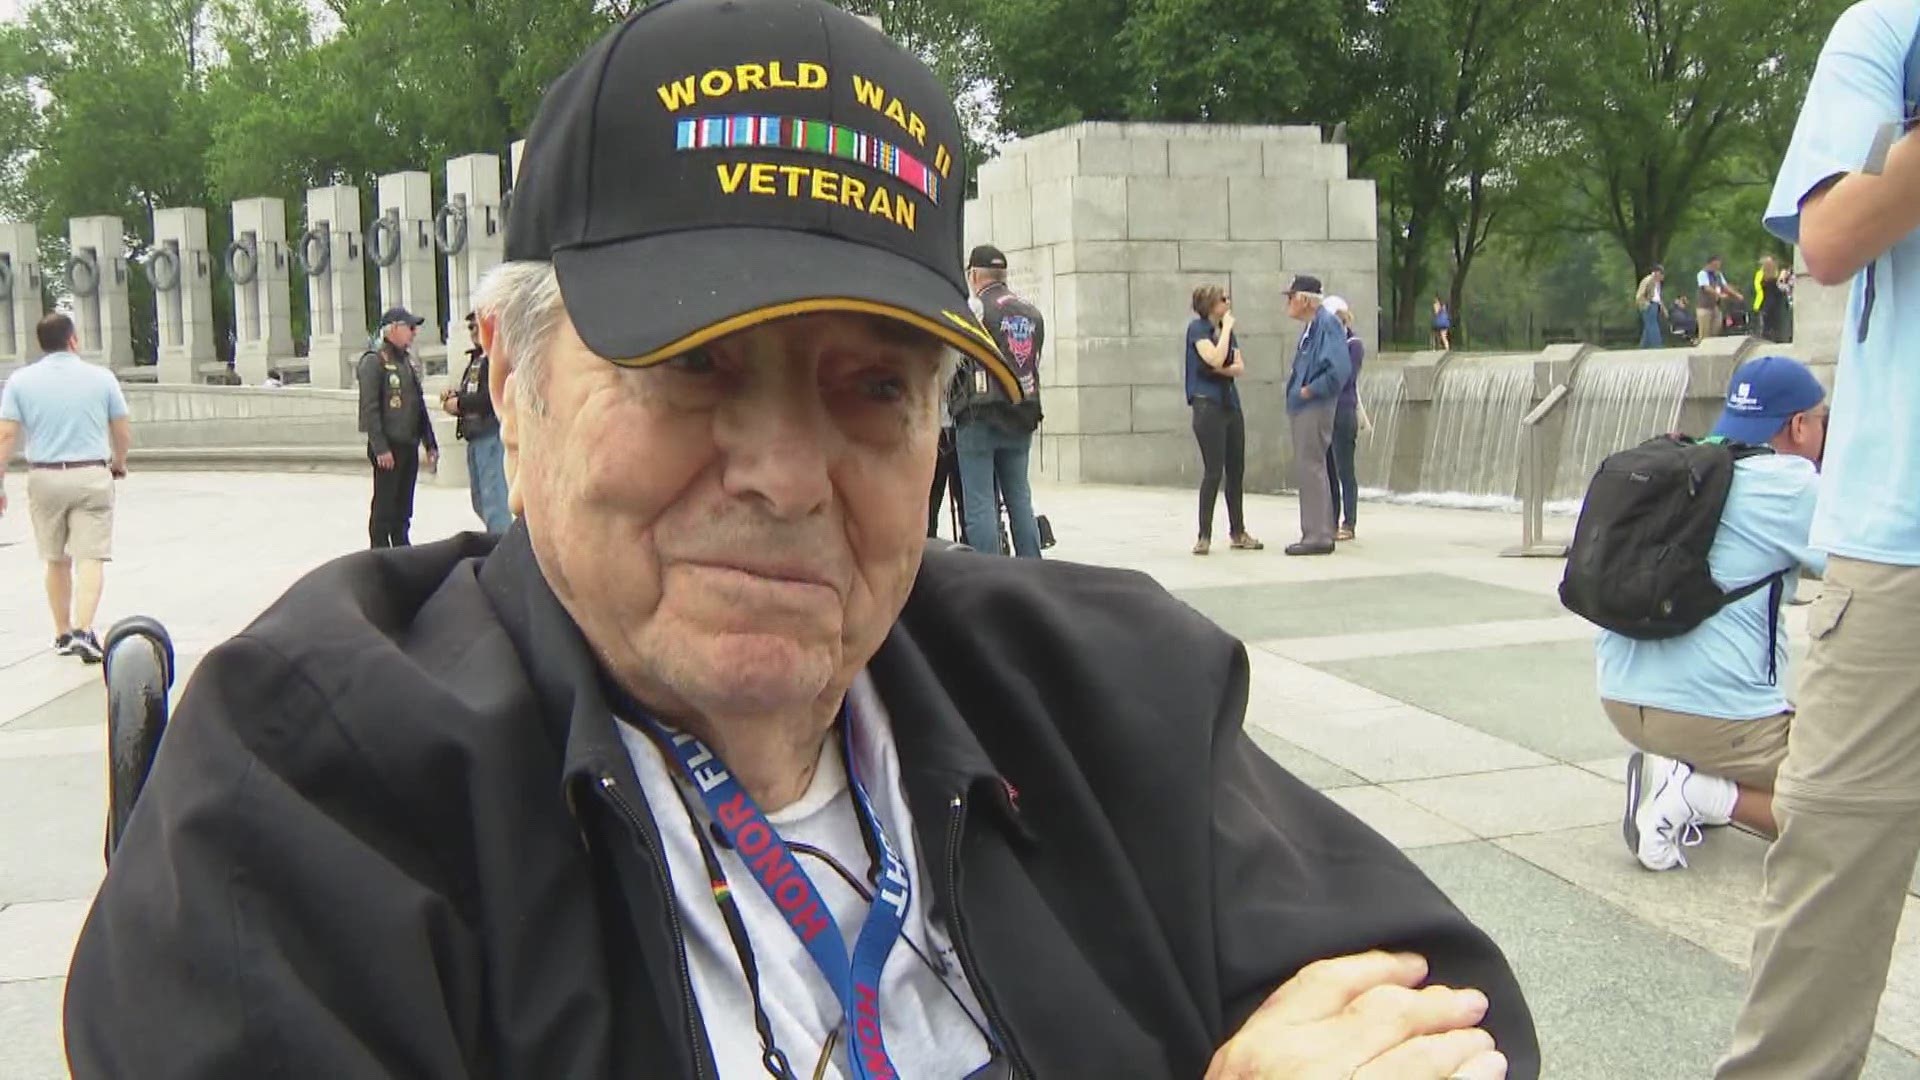 A WWII veteran on Honor Flight San Diego was laid to rest Thursday in Detroit, Michigan.